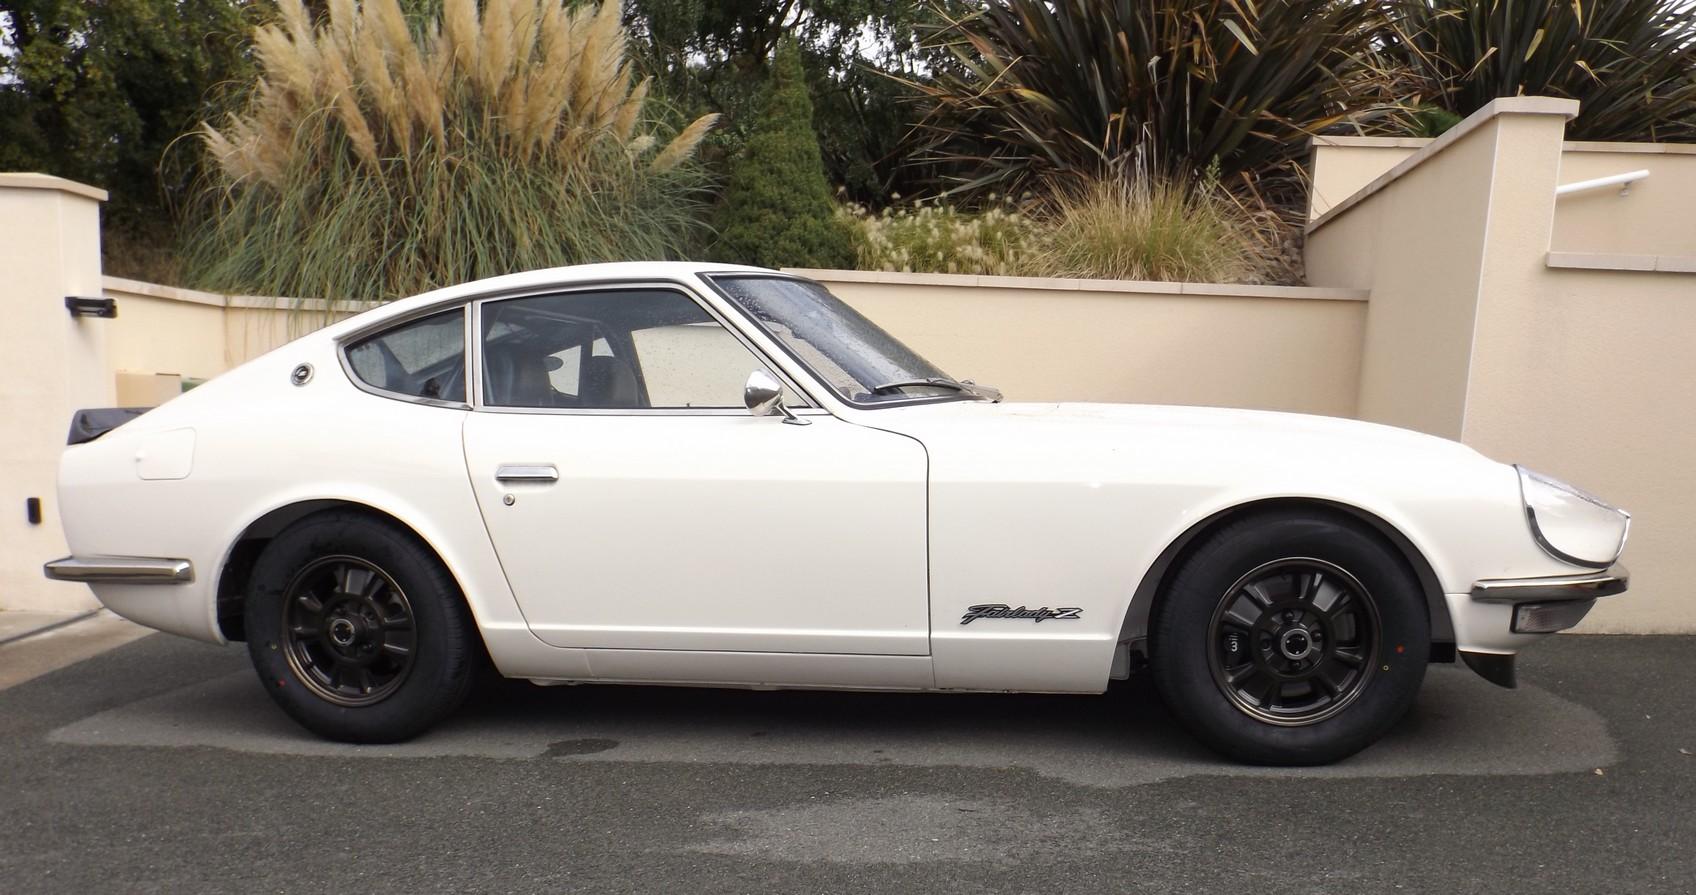 Wanted 240Z Seiko Kobe or 432 or XX wheels - Wanted - The Classic Zcar Club